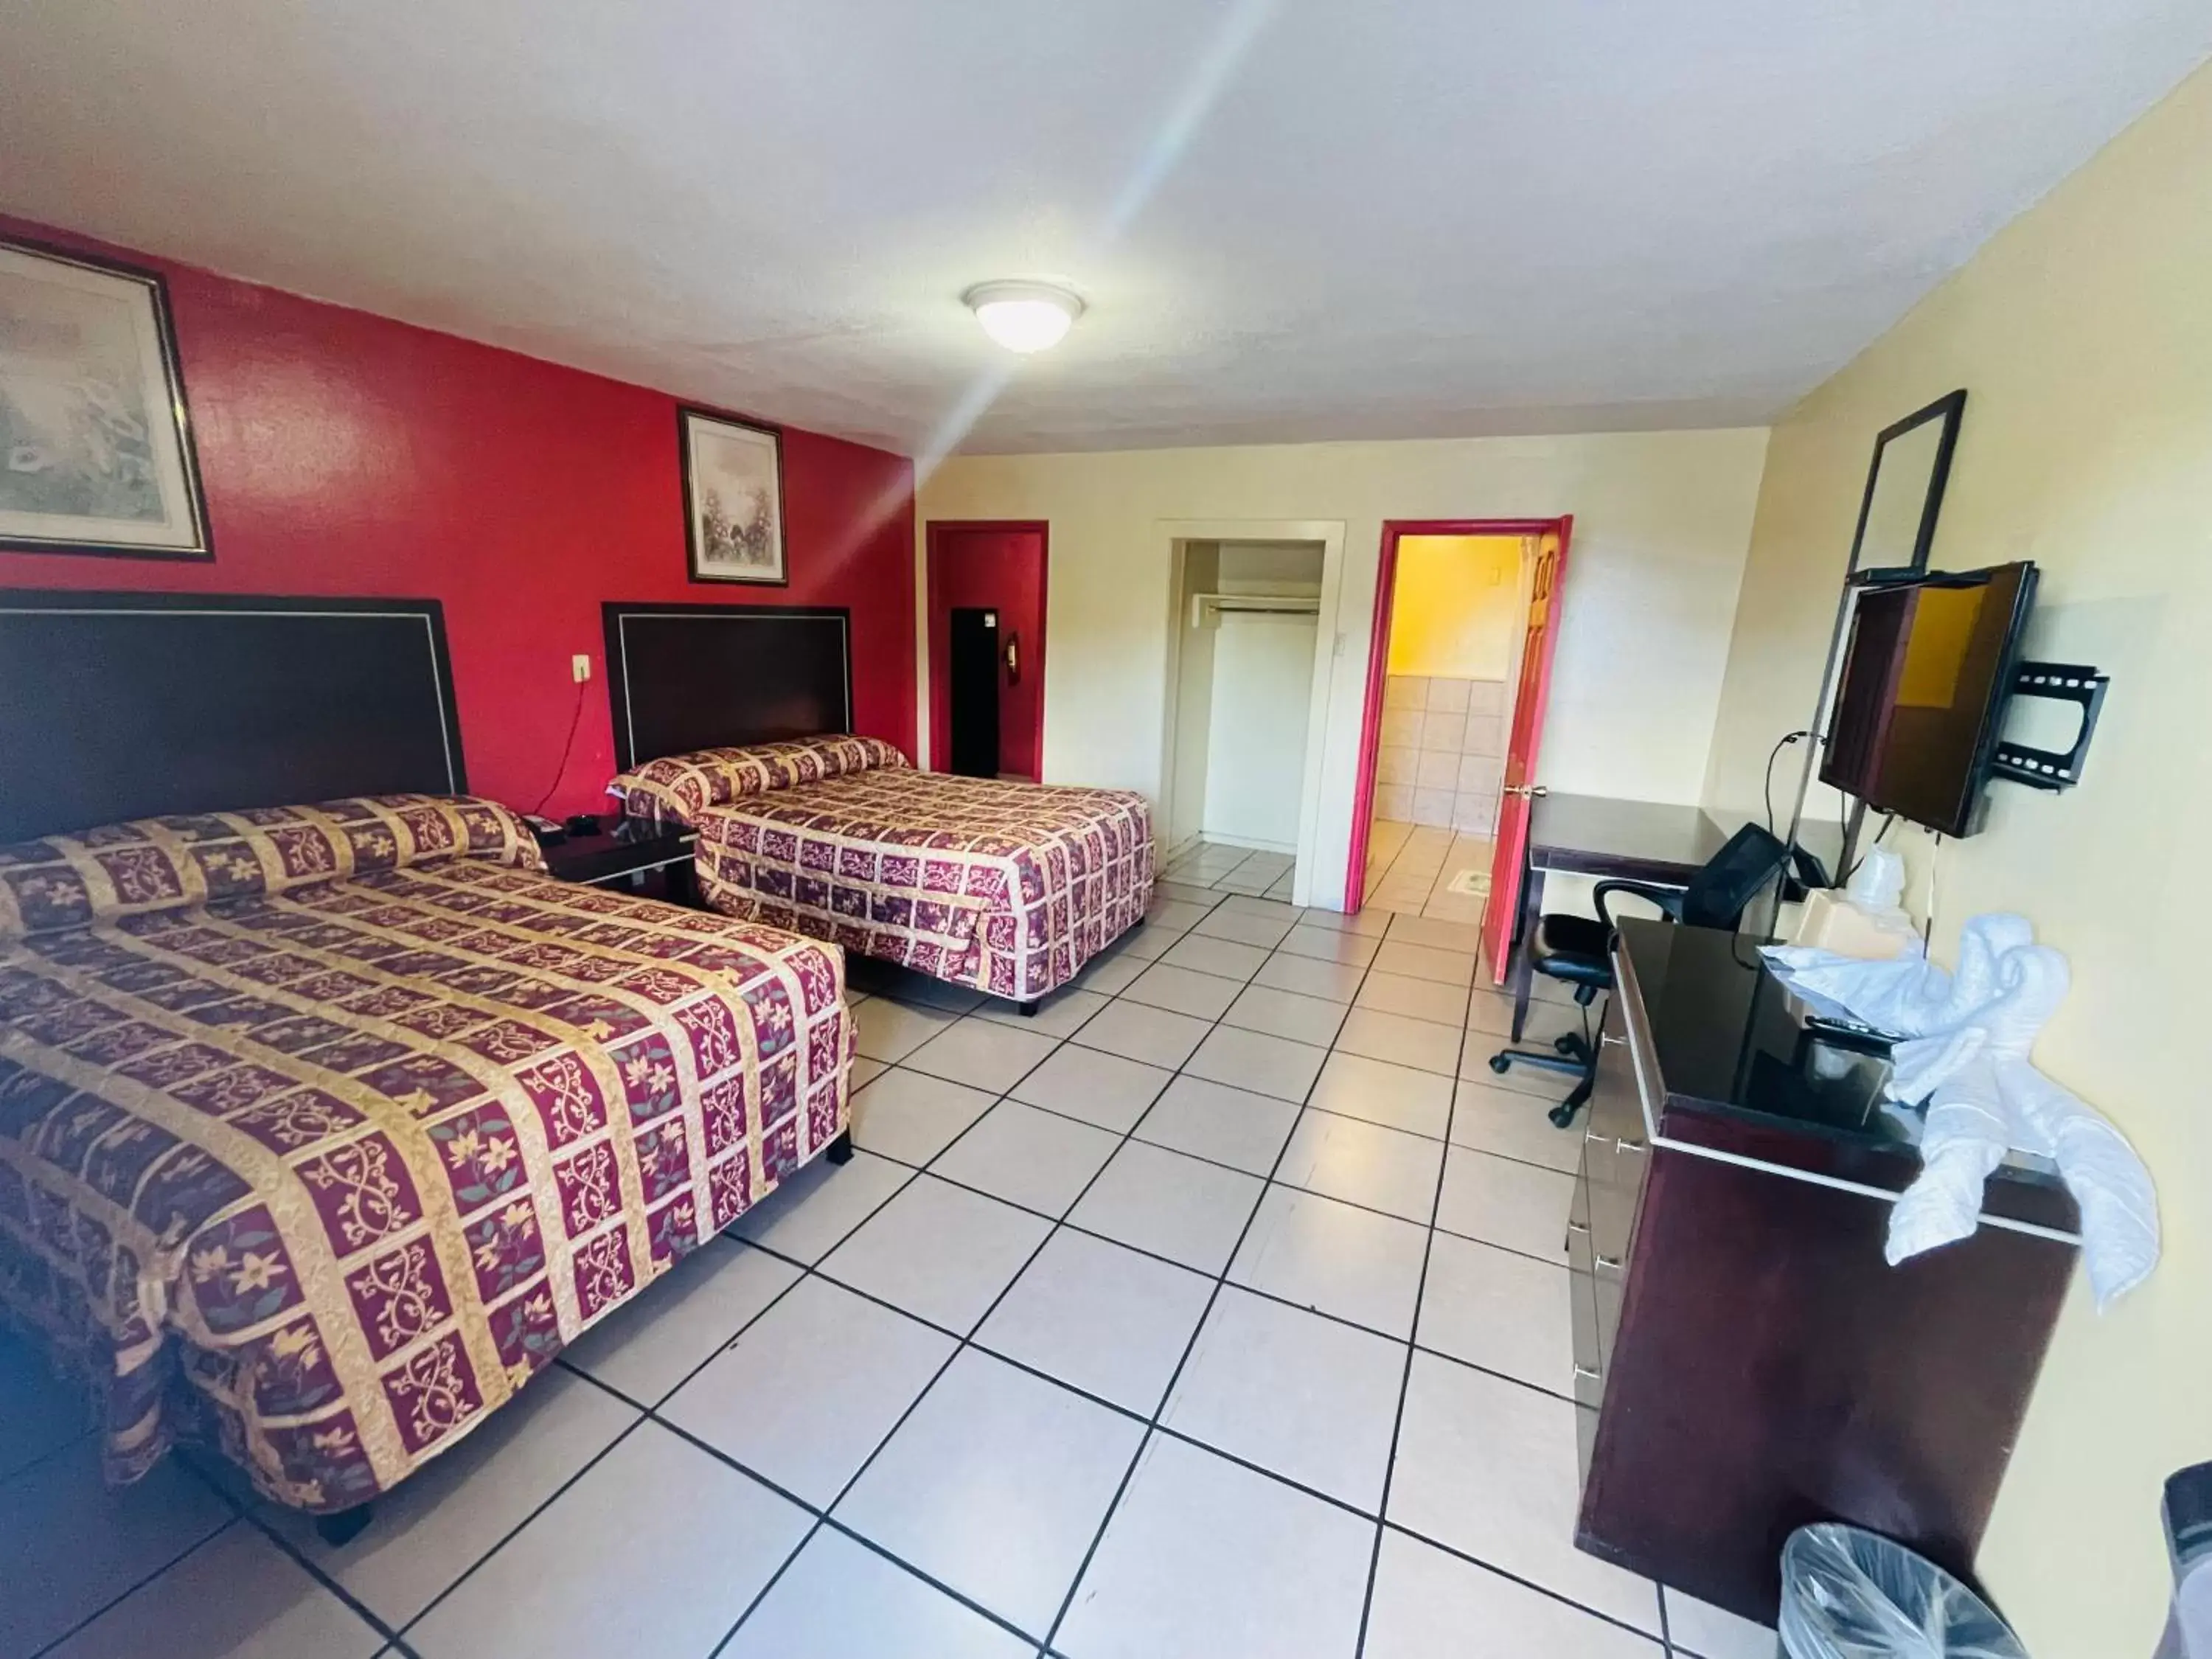 Photo of the whole room in Royal Palms Motel